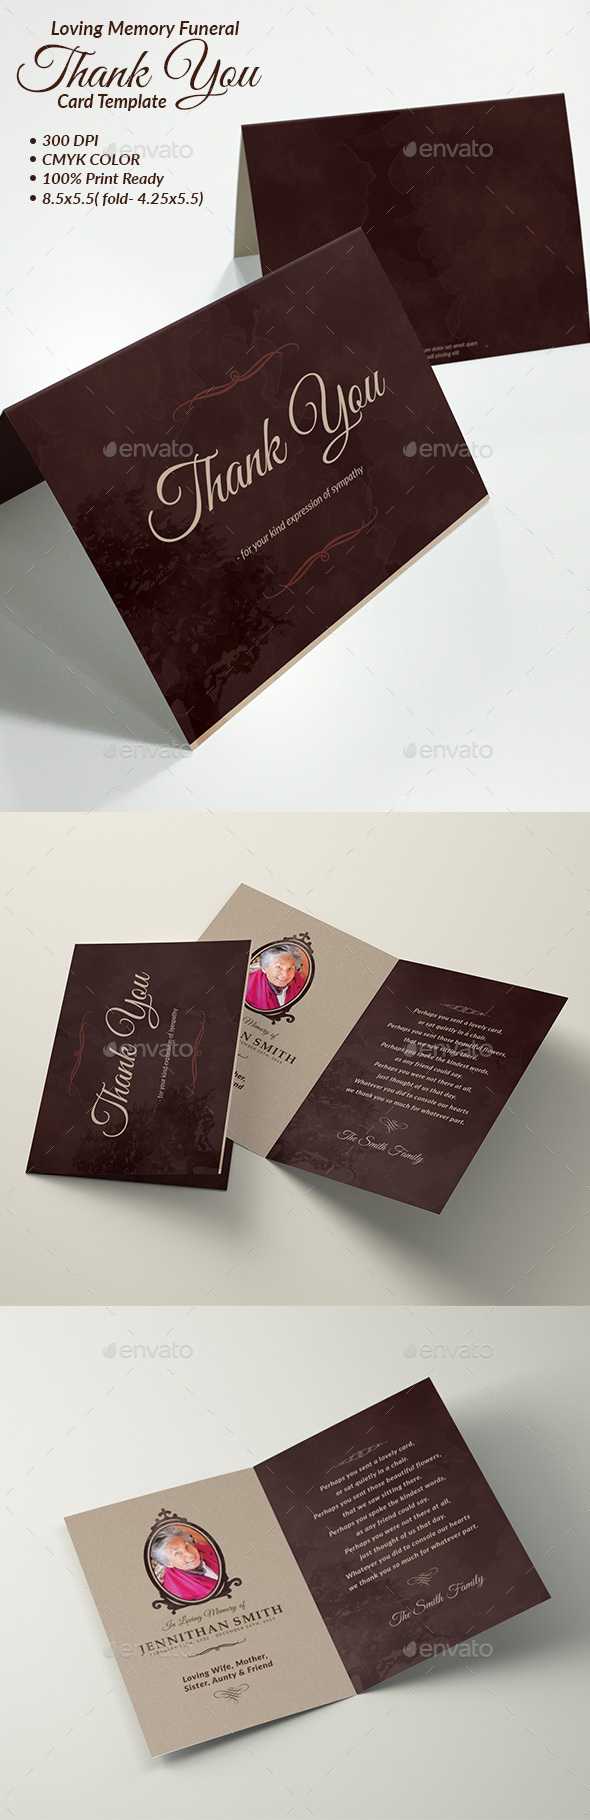 In Memory Of Graphics, Designs & Templates From Graphicriver Regarding In Memory Cards Templates